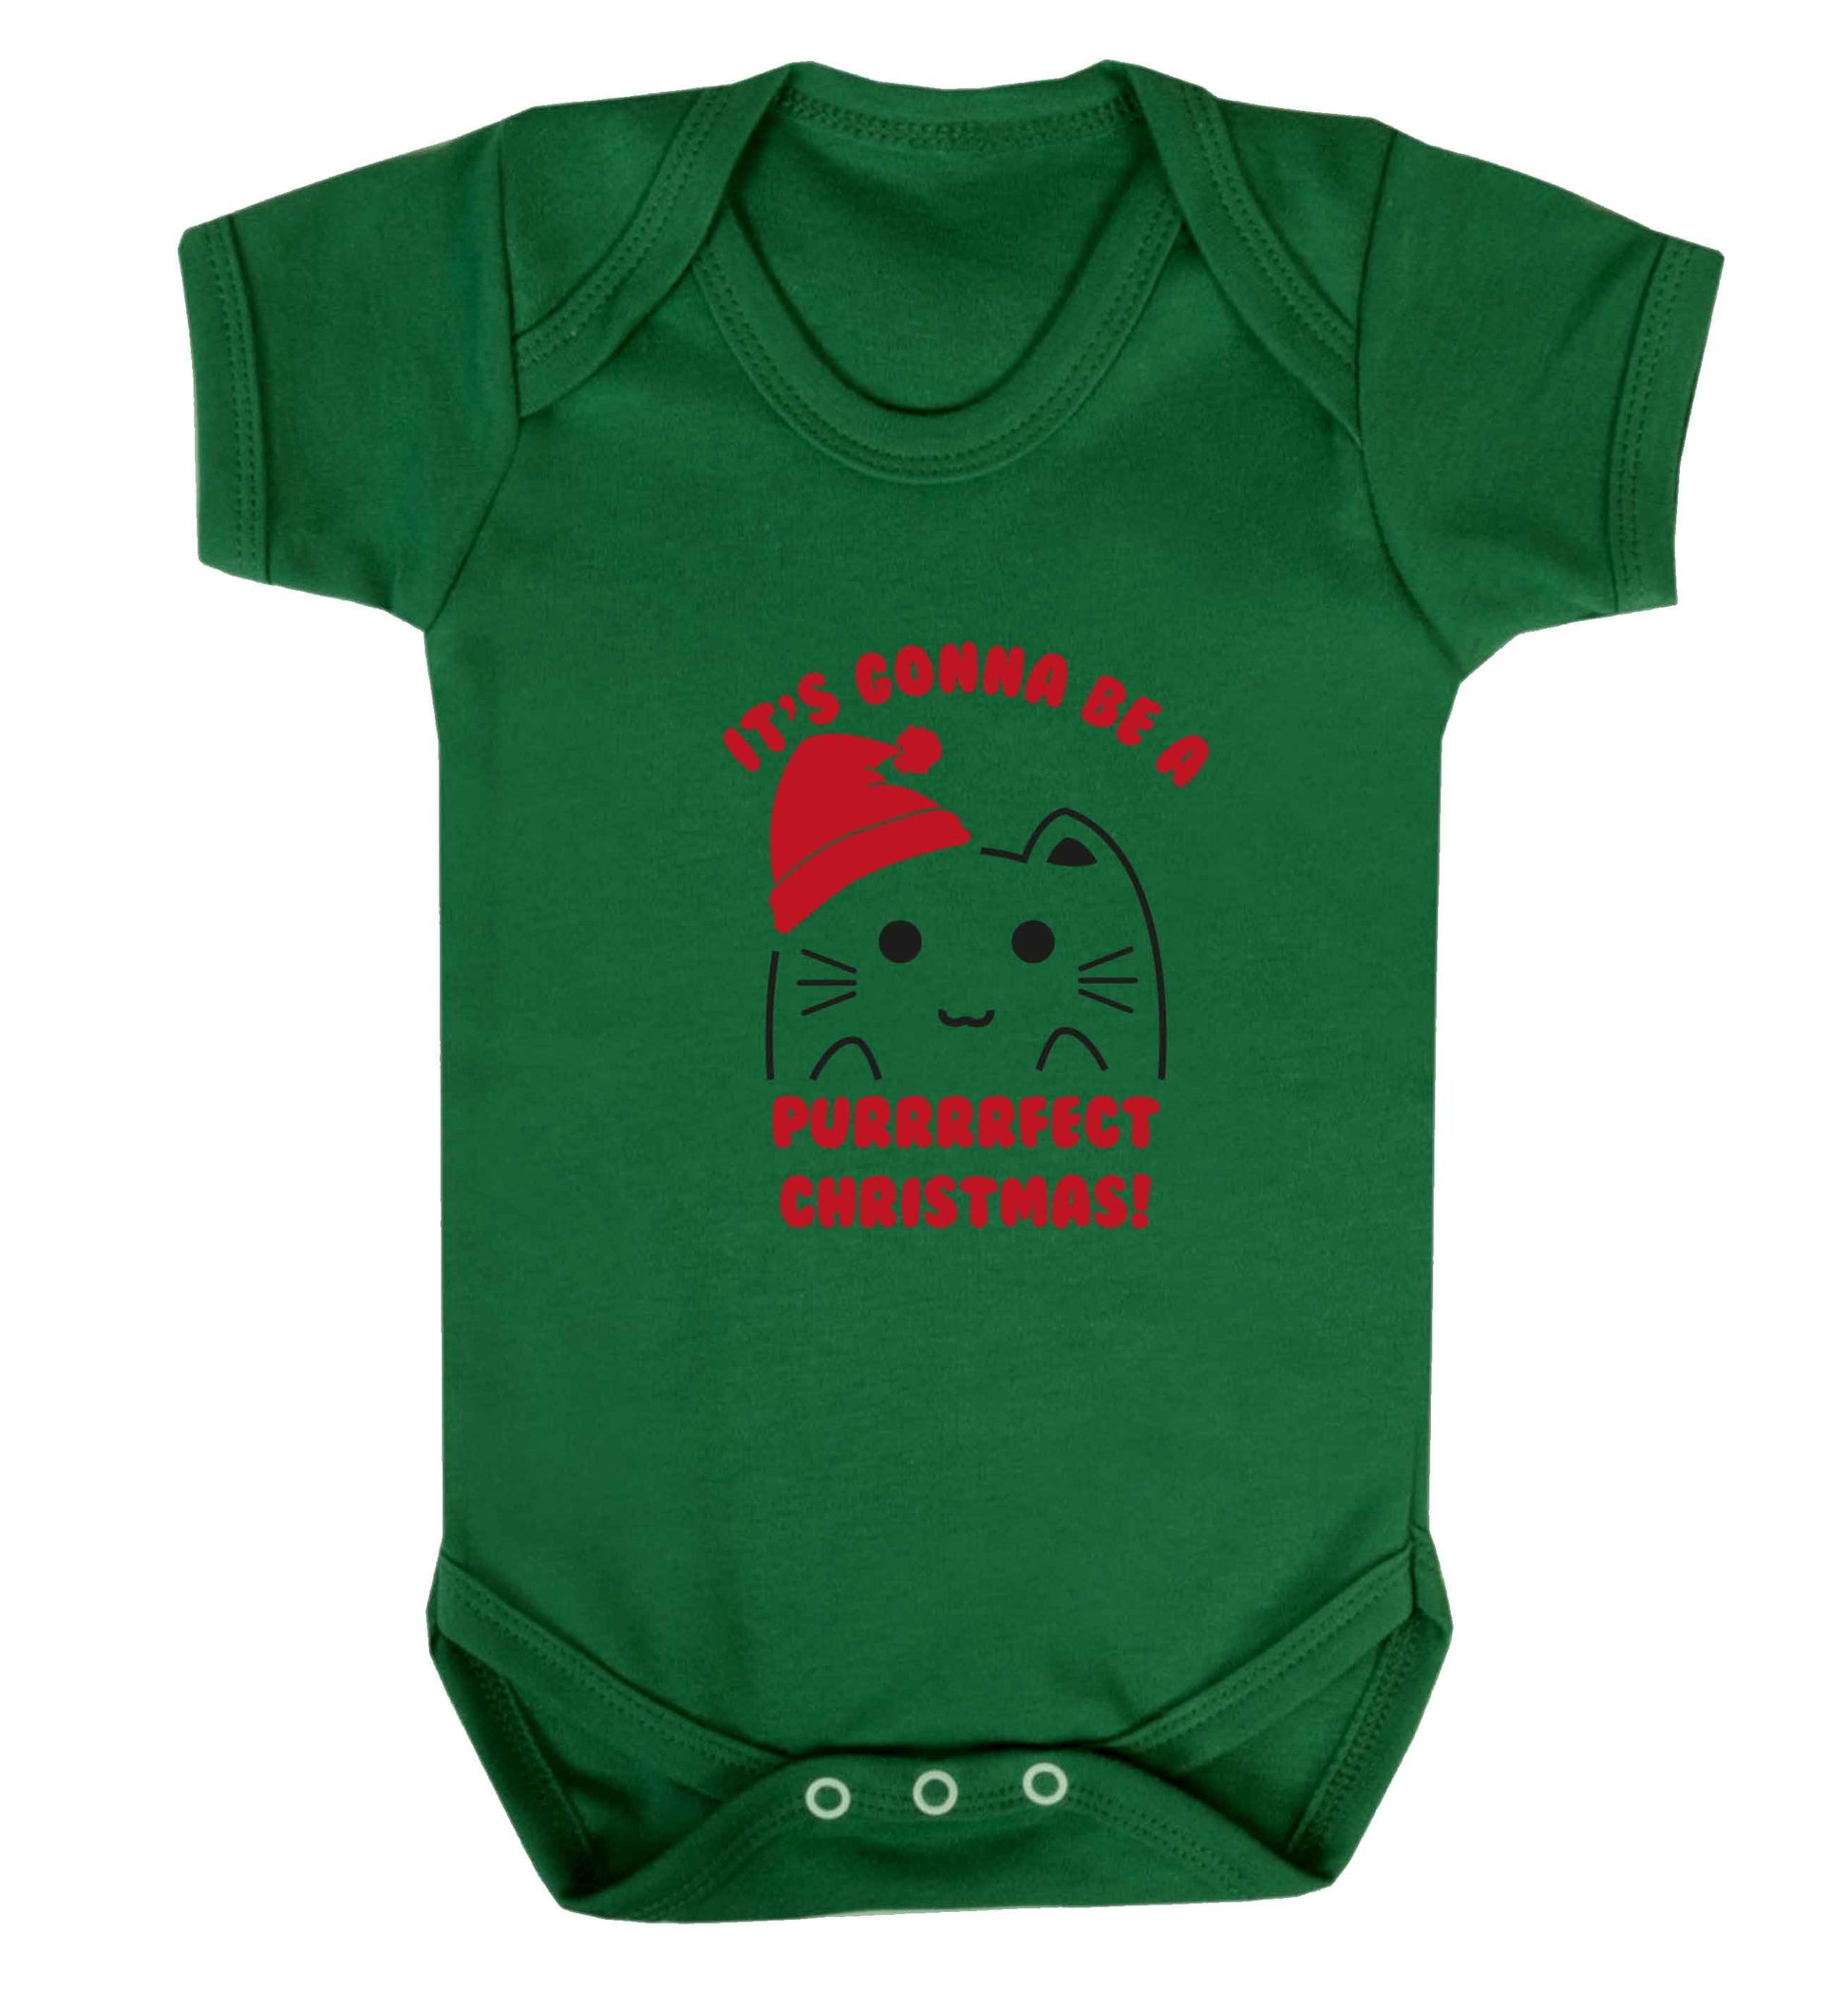 It's going to be a purrfect Christmas baby vest green 18-24 months